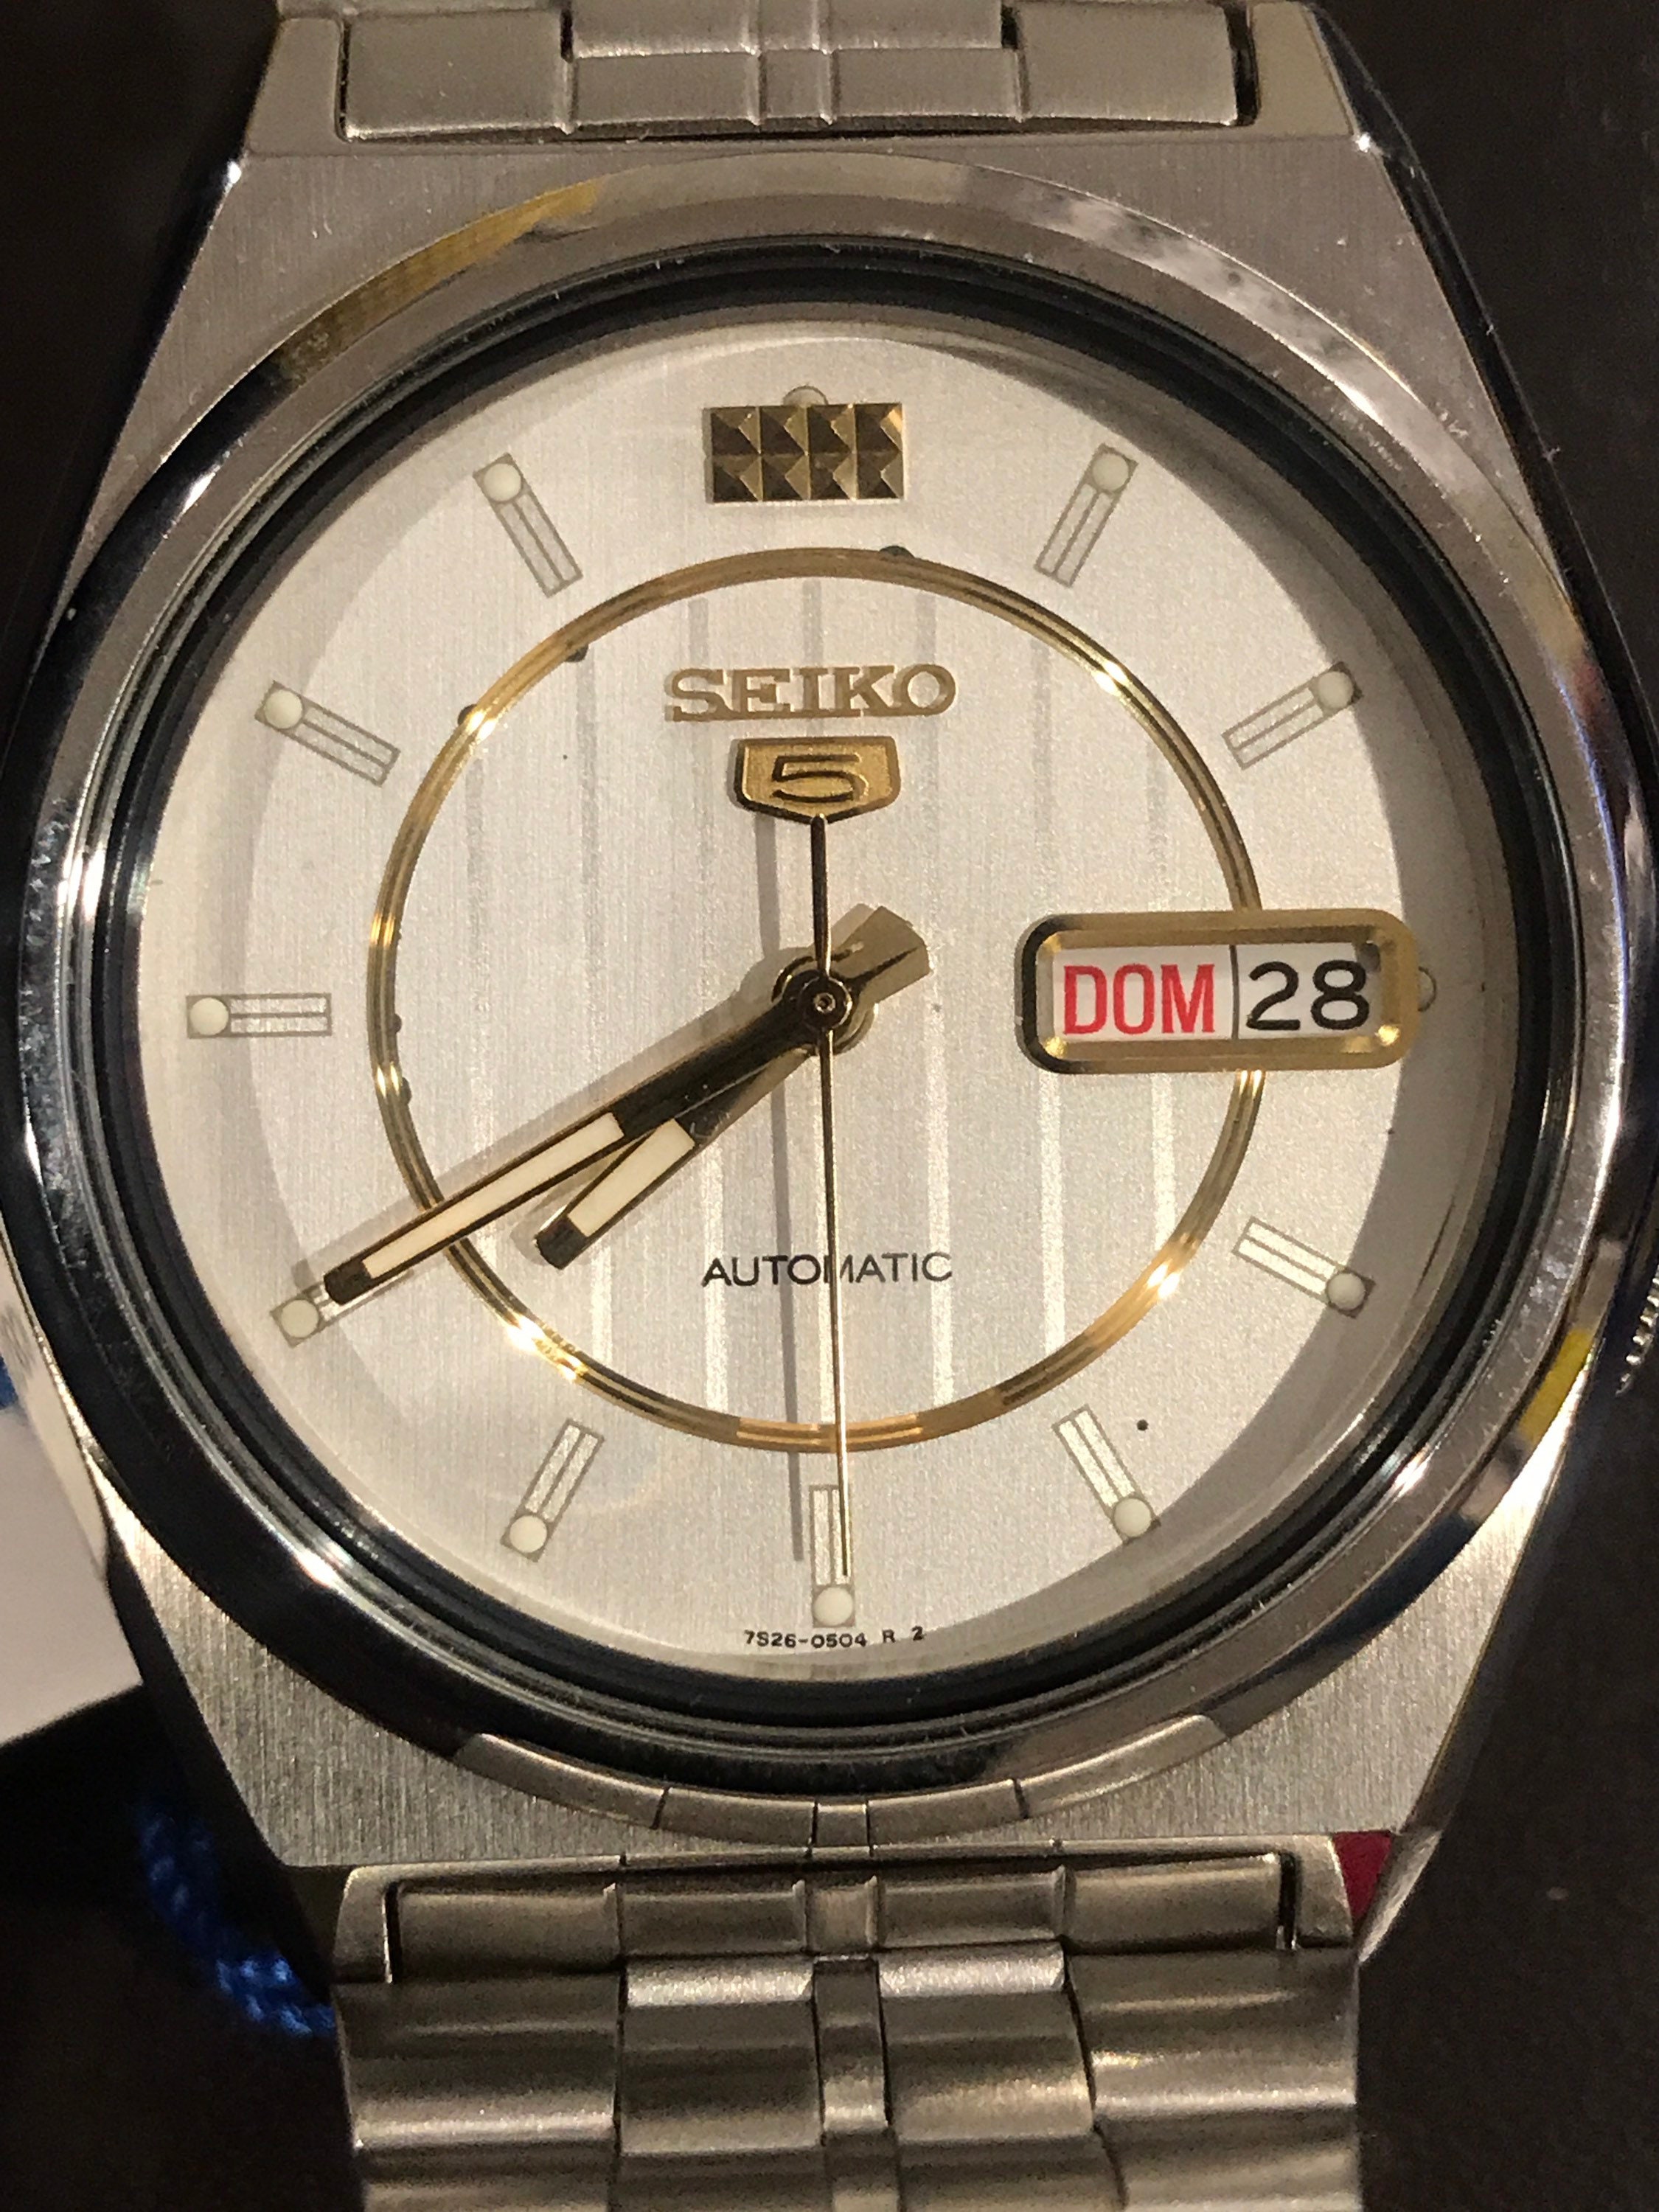 Seiko 7S26-0504 R 2 Day/ Date Automatic 21J Japan Watch - Etsy UK